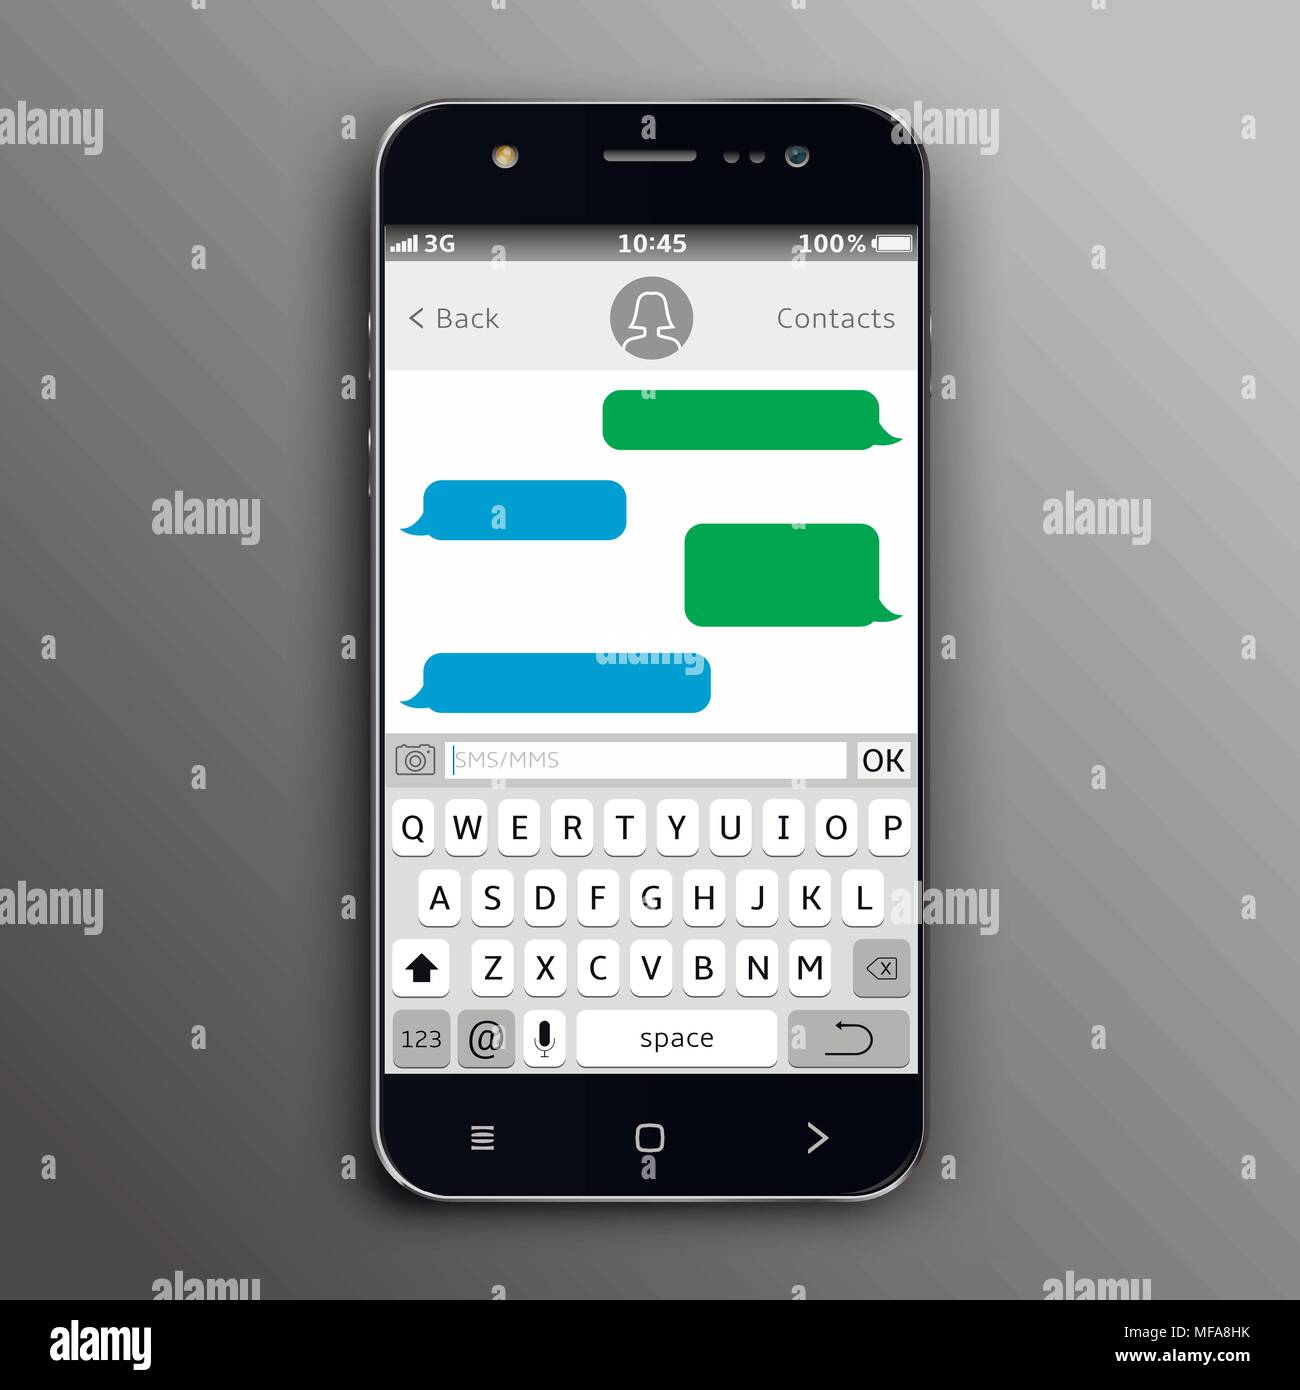 Mobile phone. Messenger window. Chating and messaging concept. Vector illustration Stock Vector